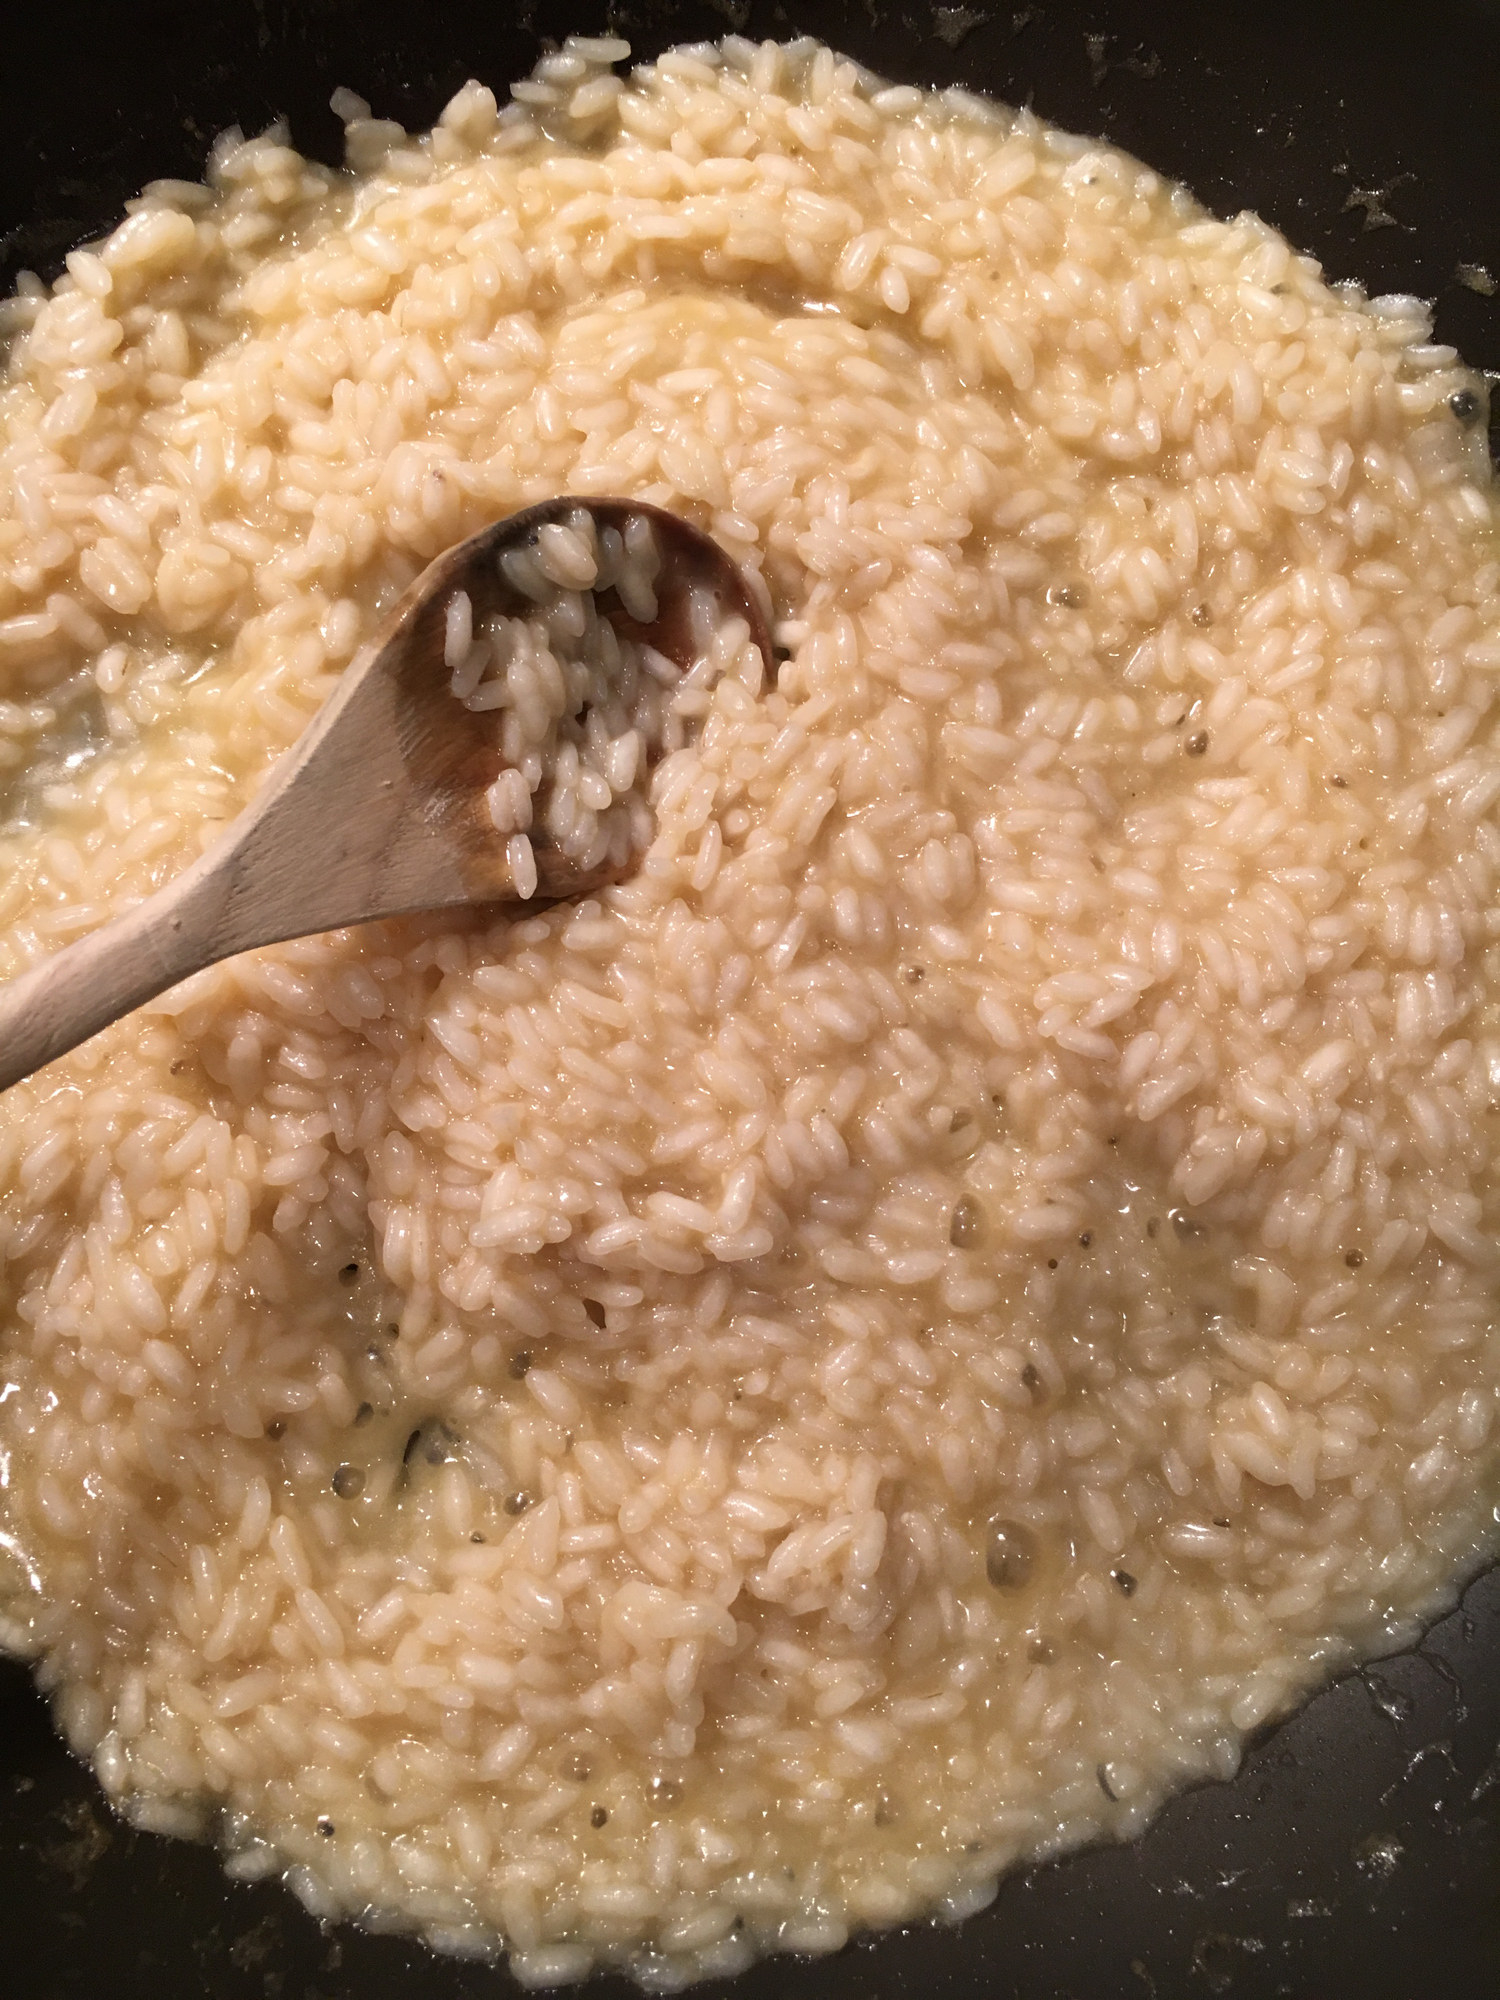 Cooking risotto stirred with a wooden spoon.